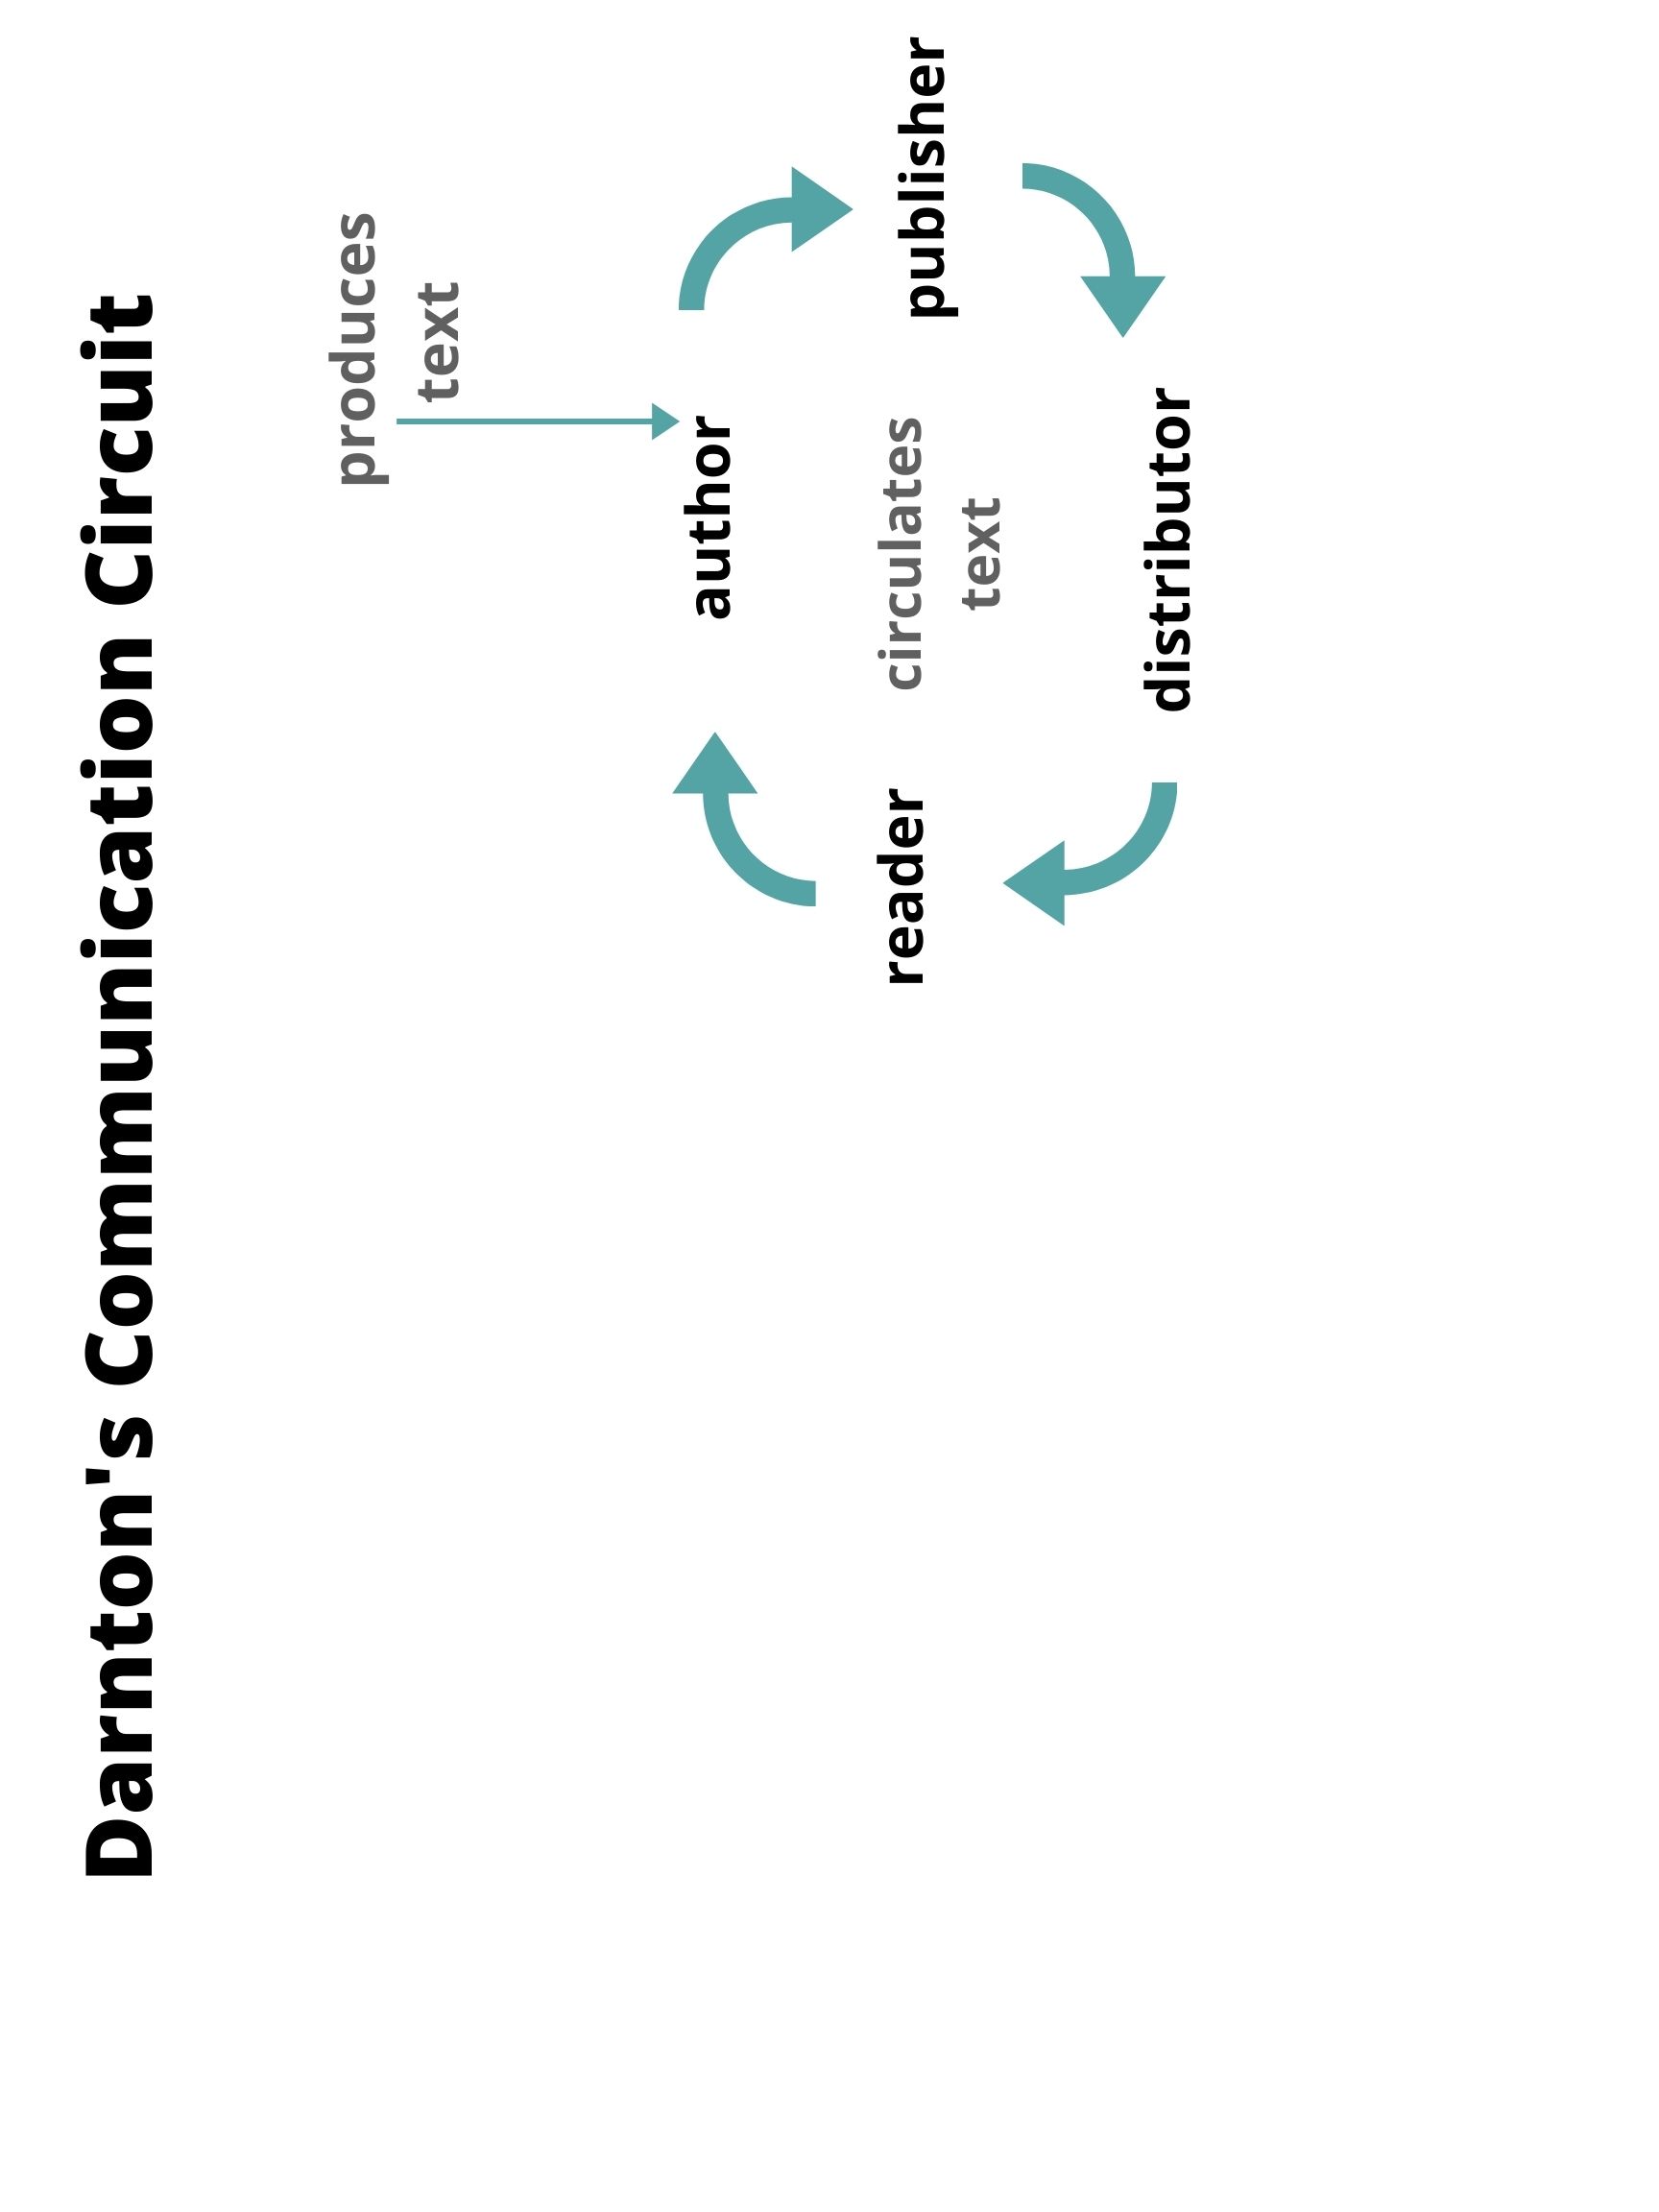 Clockwise circulation of texts from author to publisher, distributor, reader